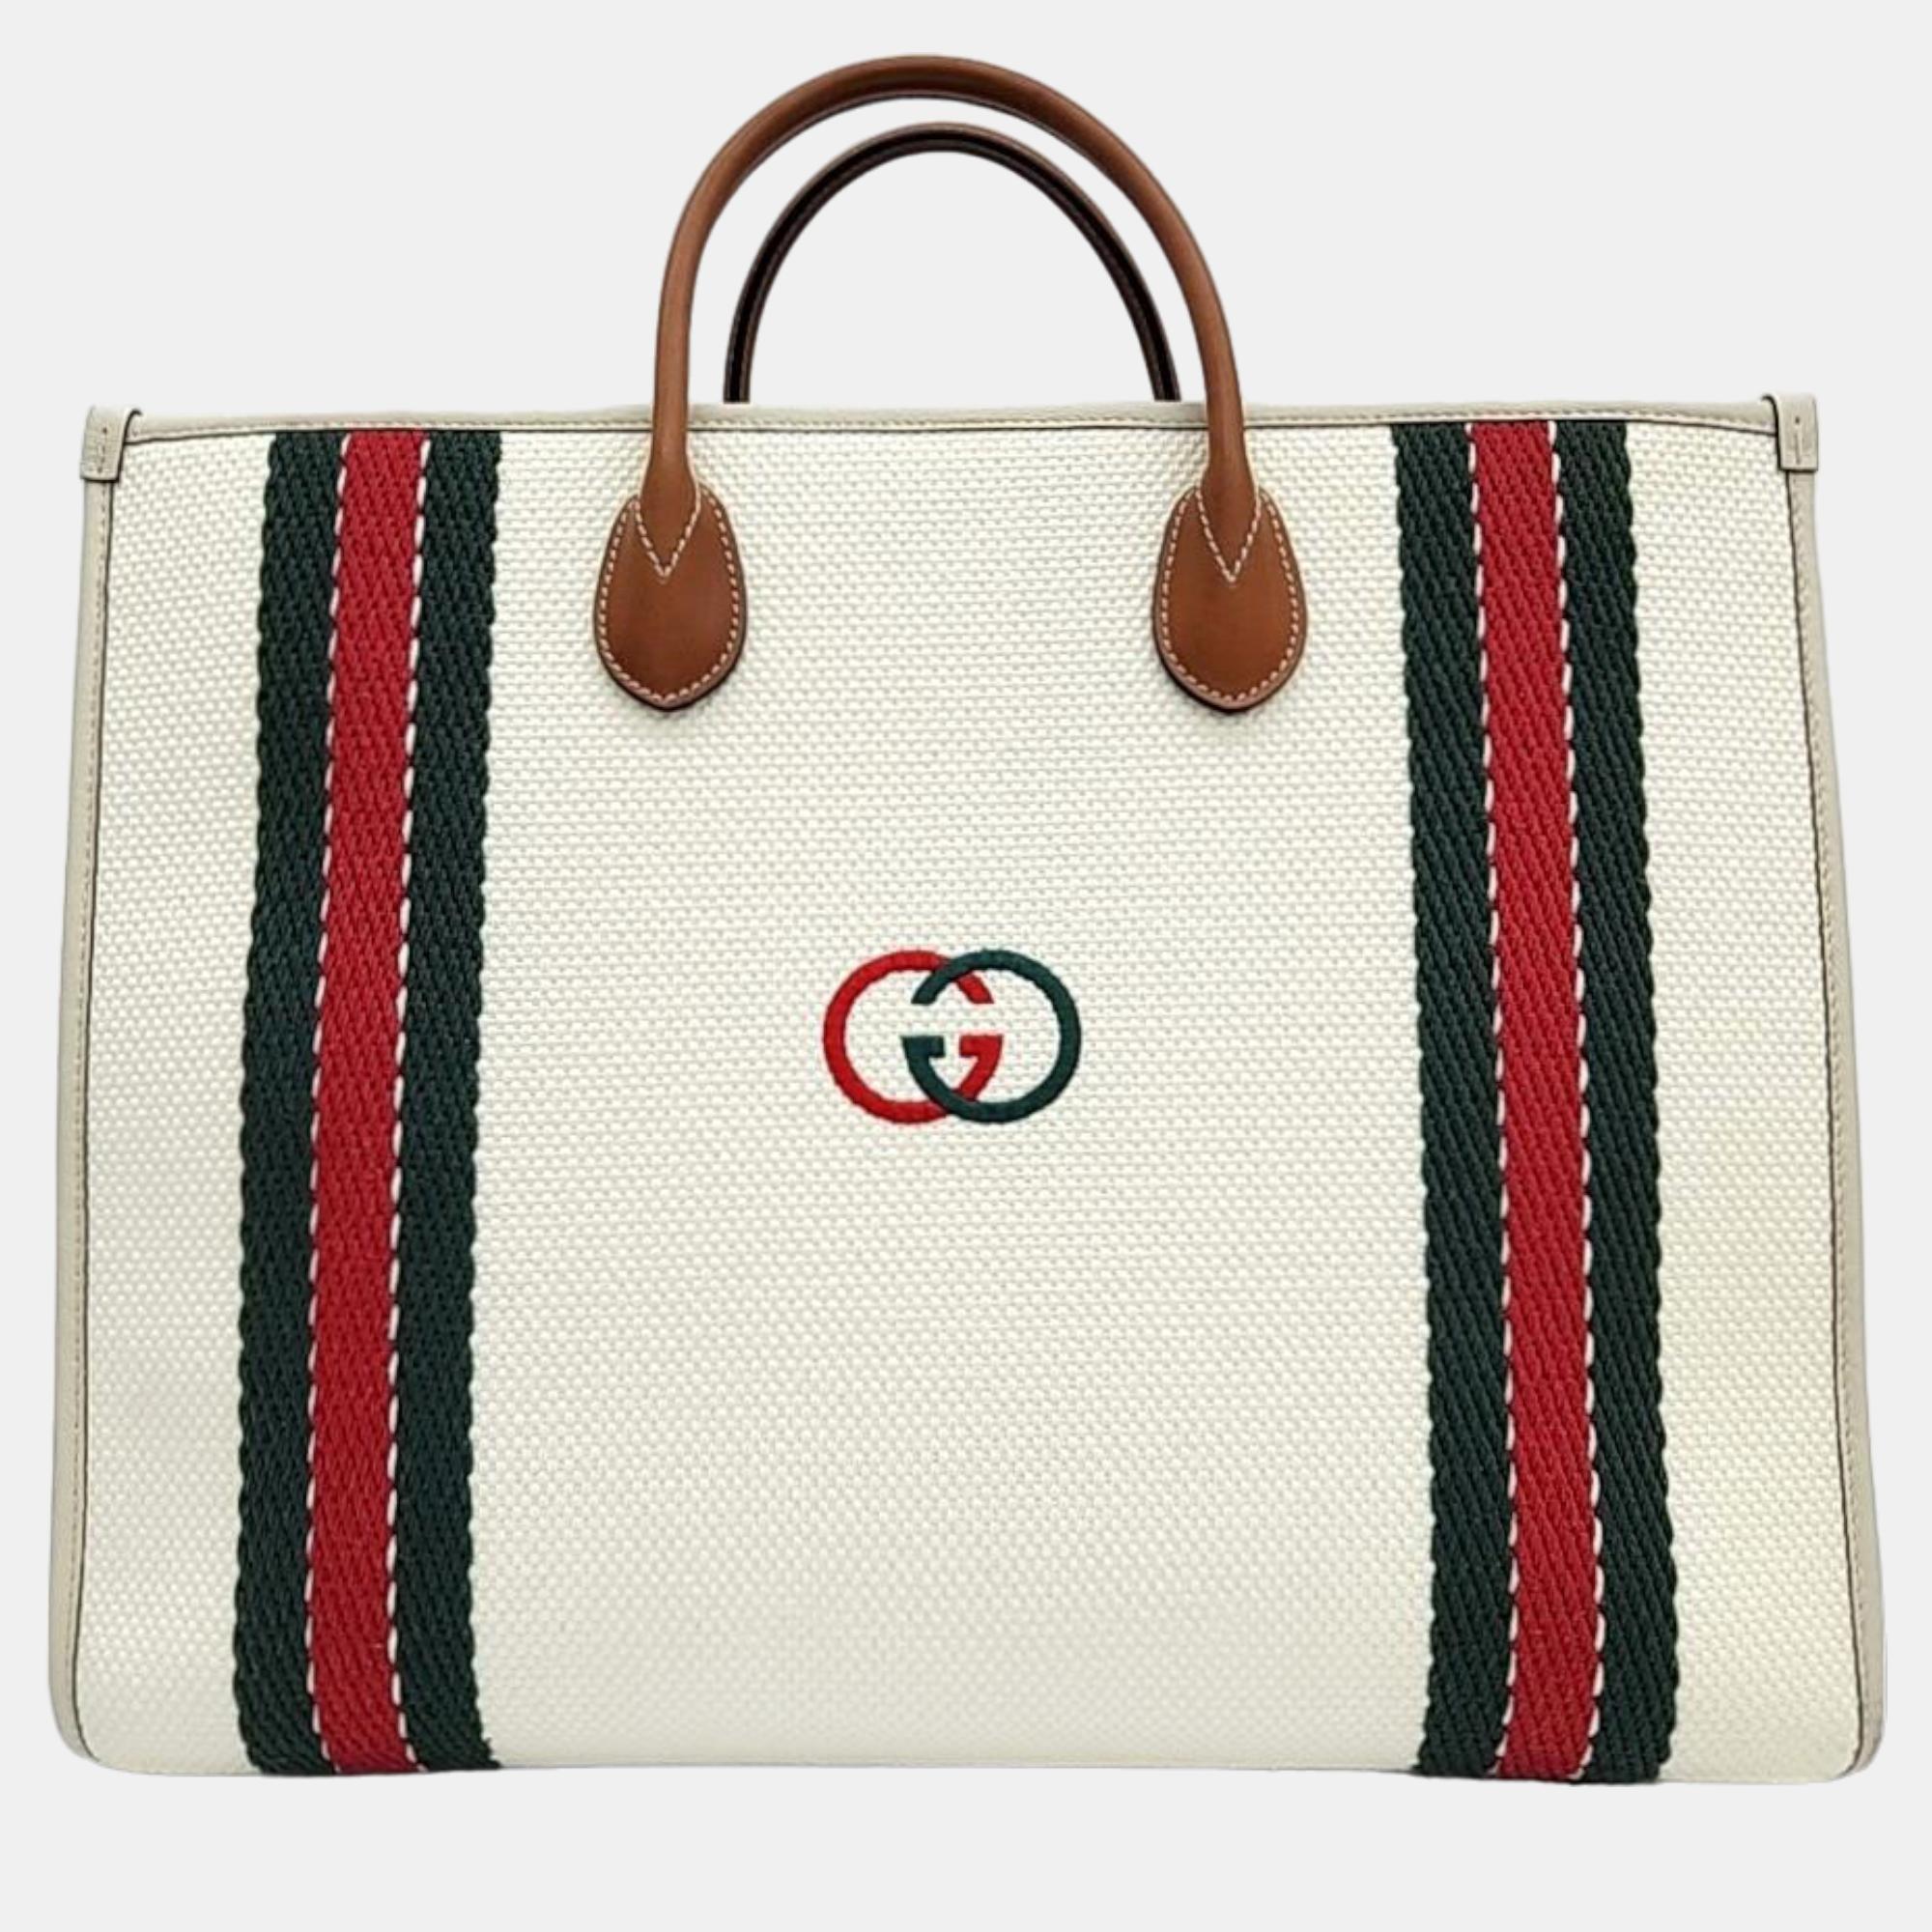 Pre-owned Gucci White Leather Gg Shoulder Bag